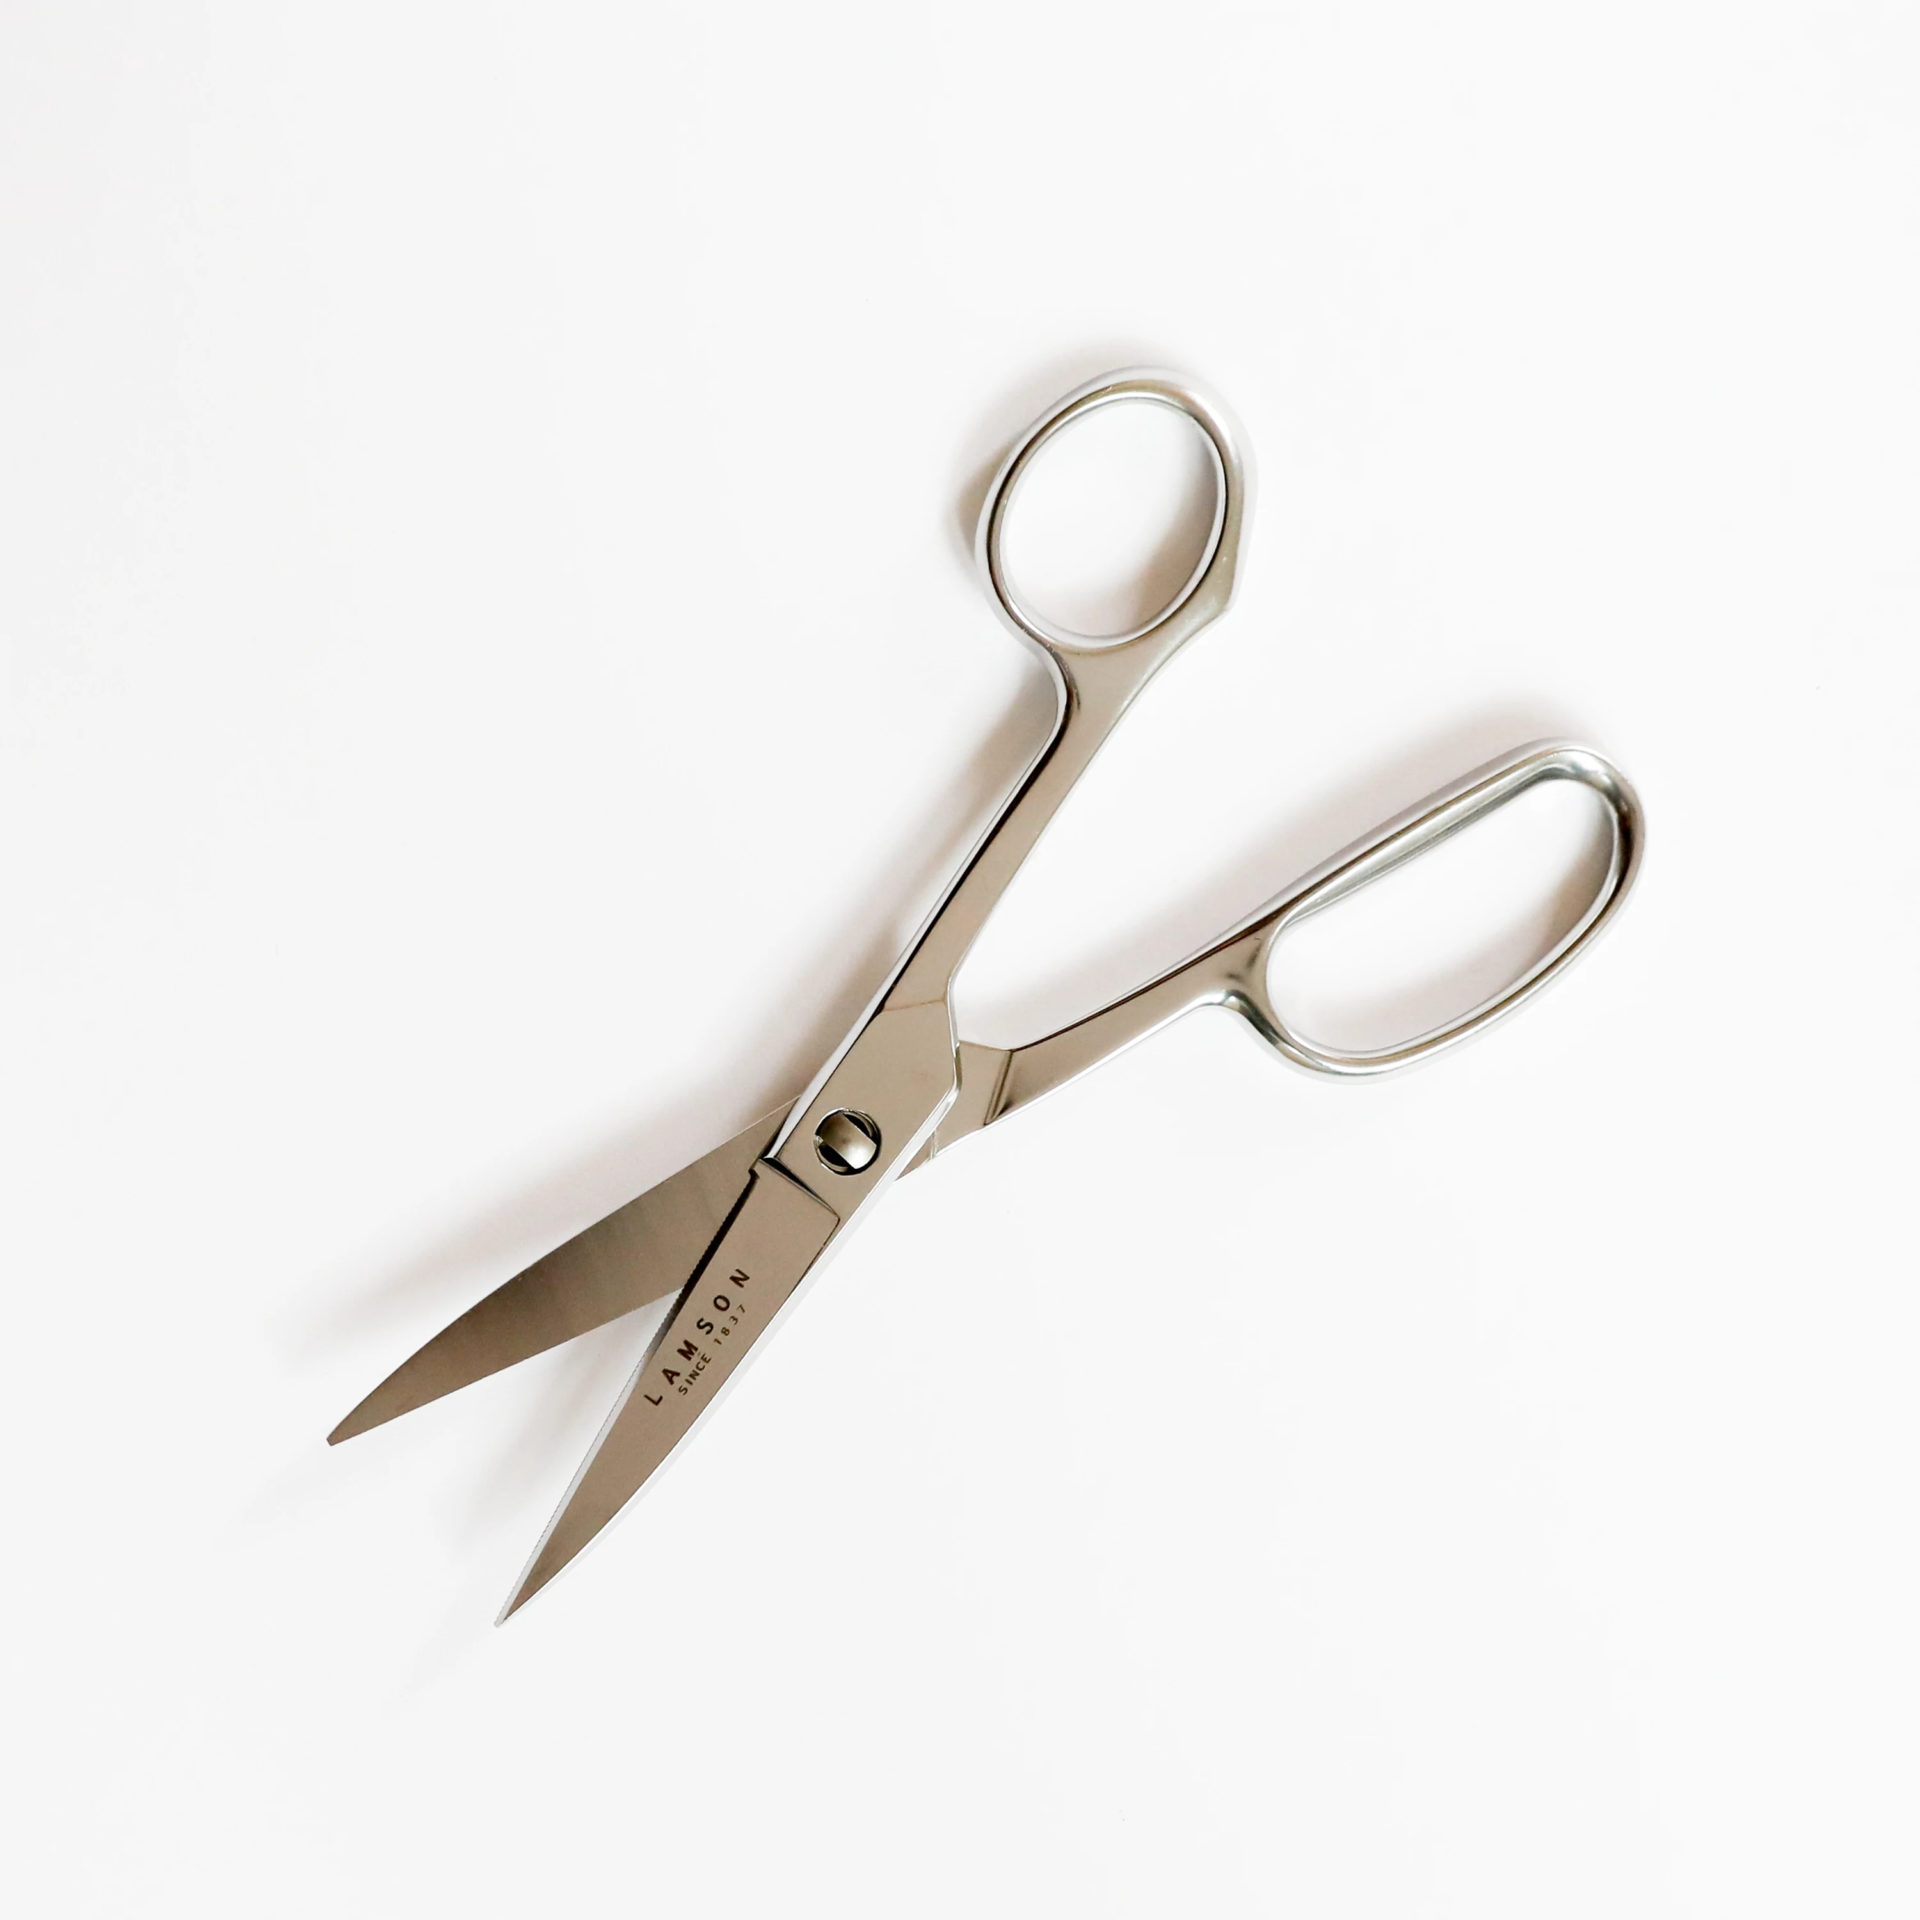 Lamson Kitchen Shears: Versatile & USA-made for Every Cook